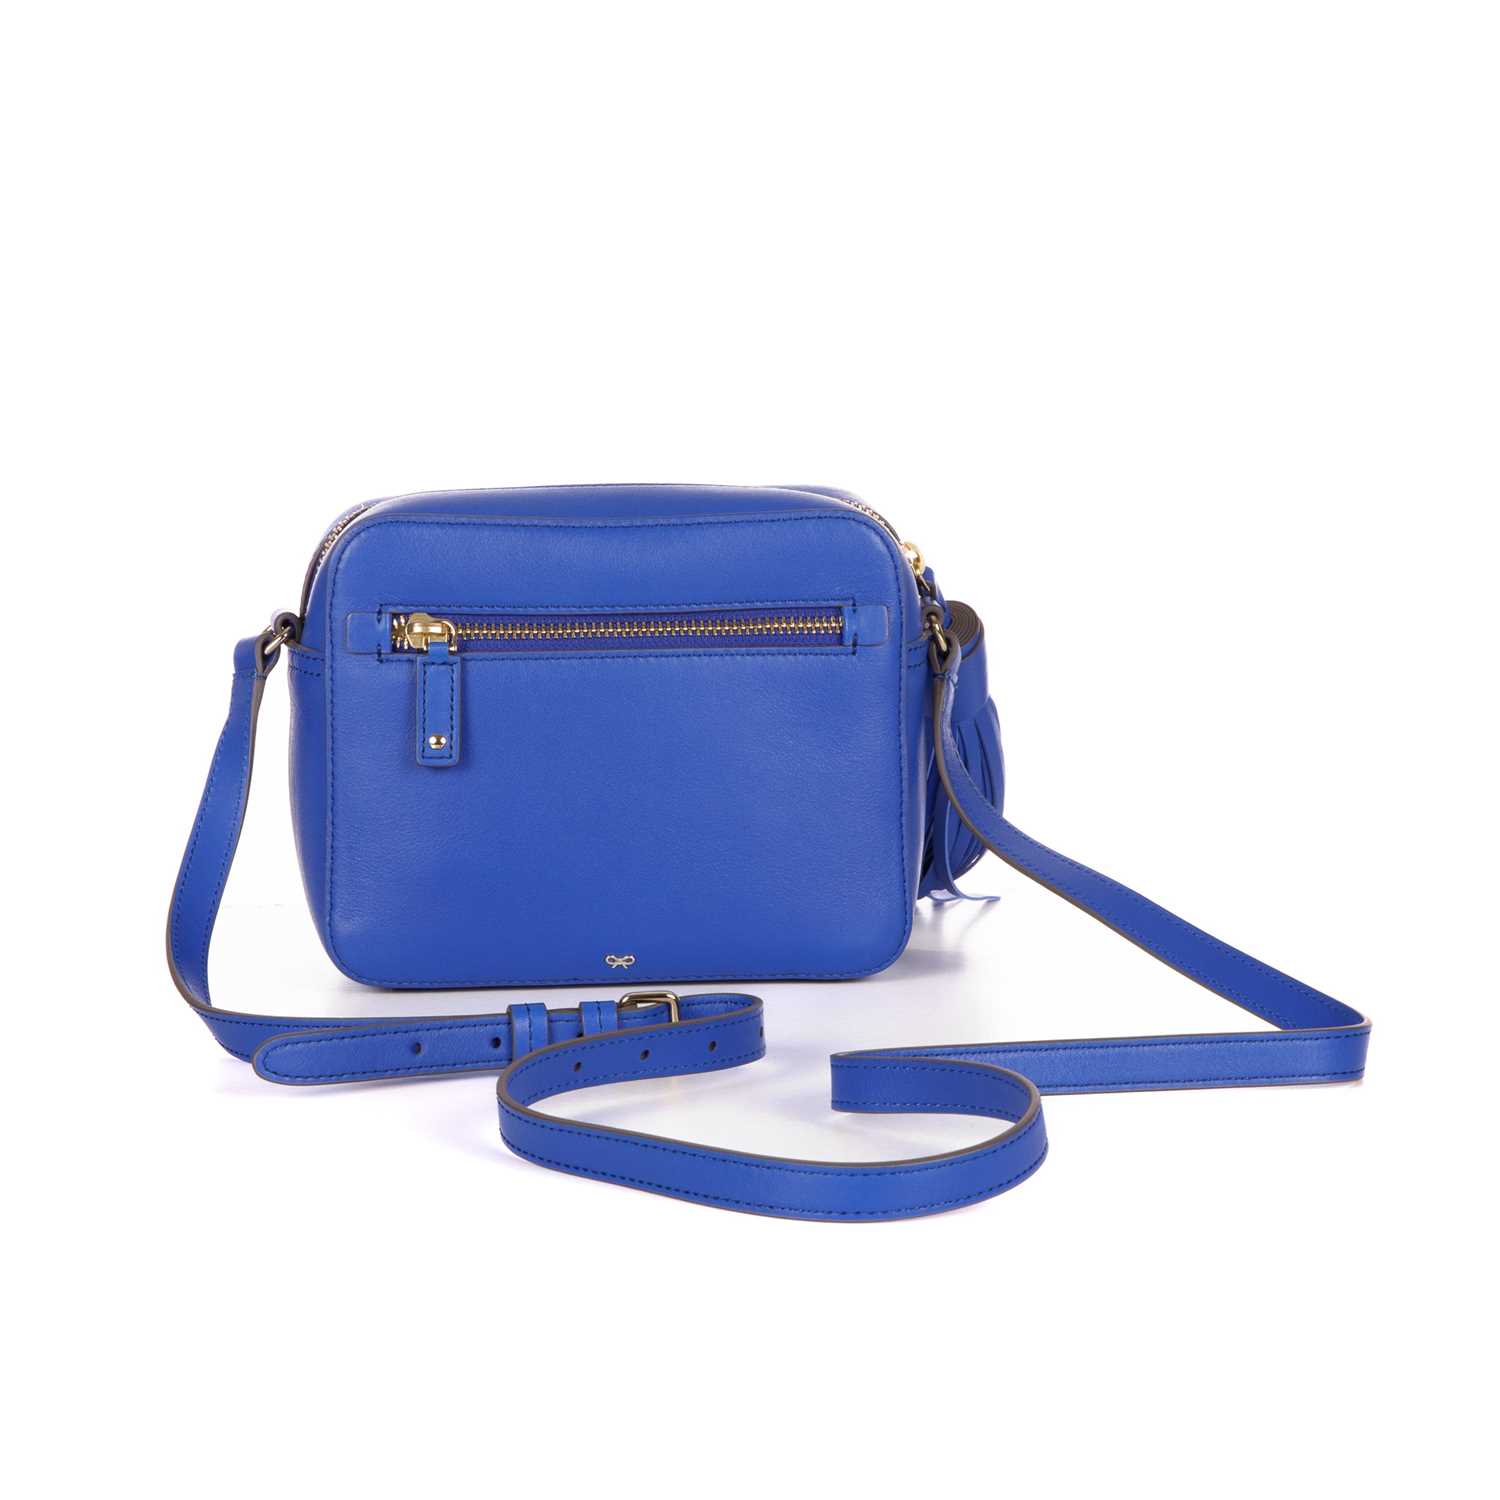 Anya Hindmarch, a blue Smiley crossbody handbag, crafted from smooth electric blue leather, - Image 2 of 4